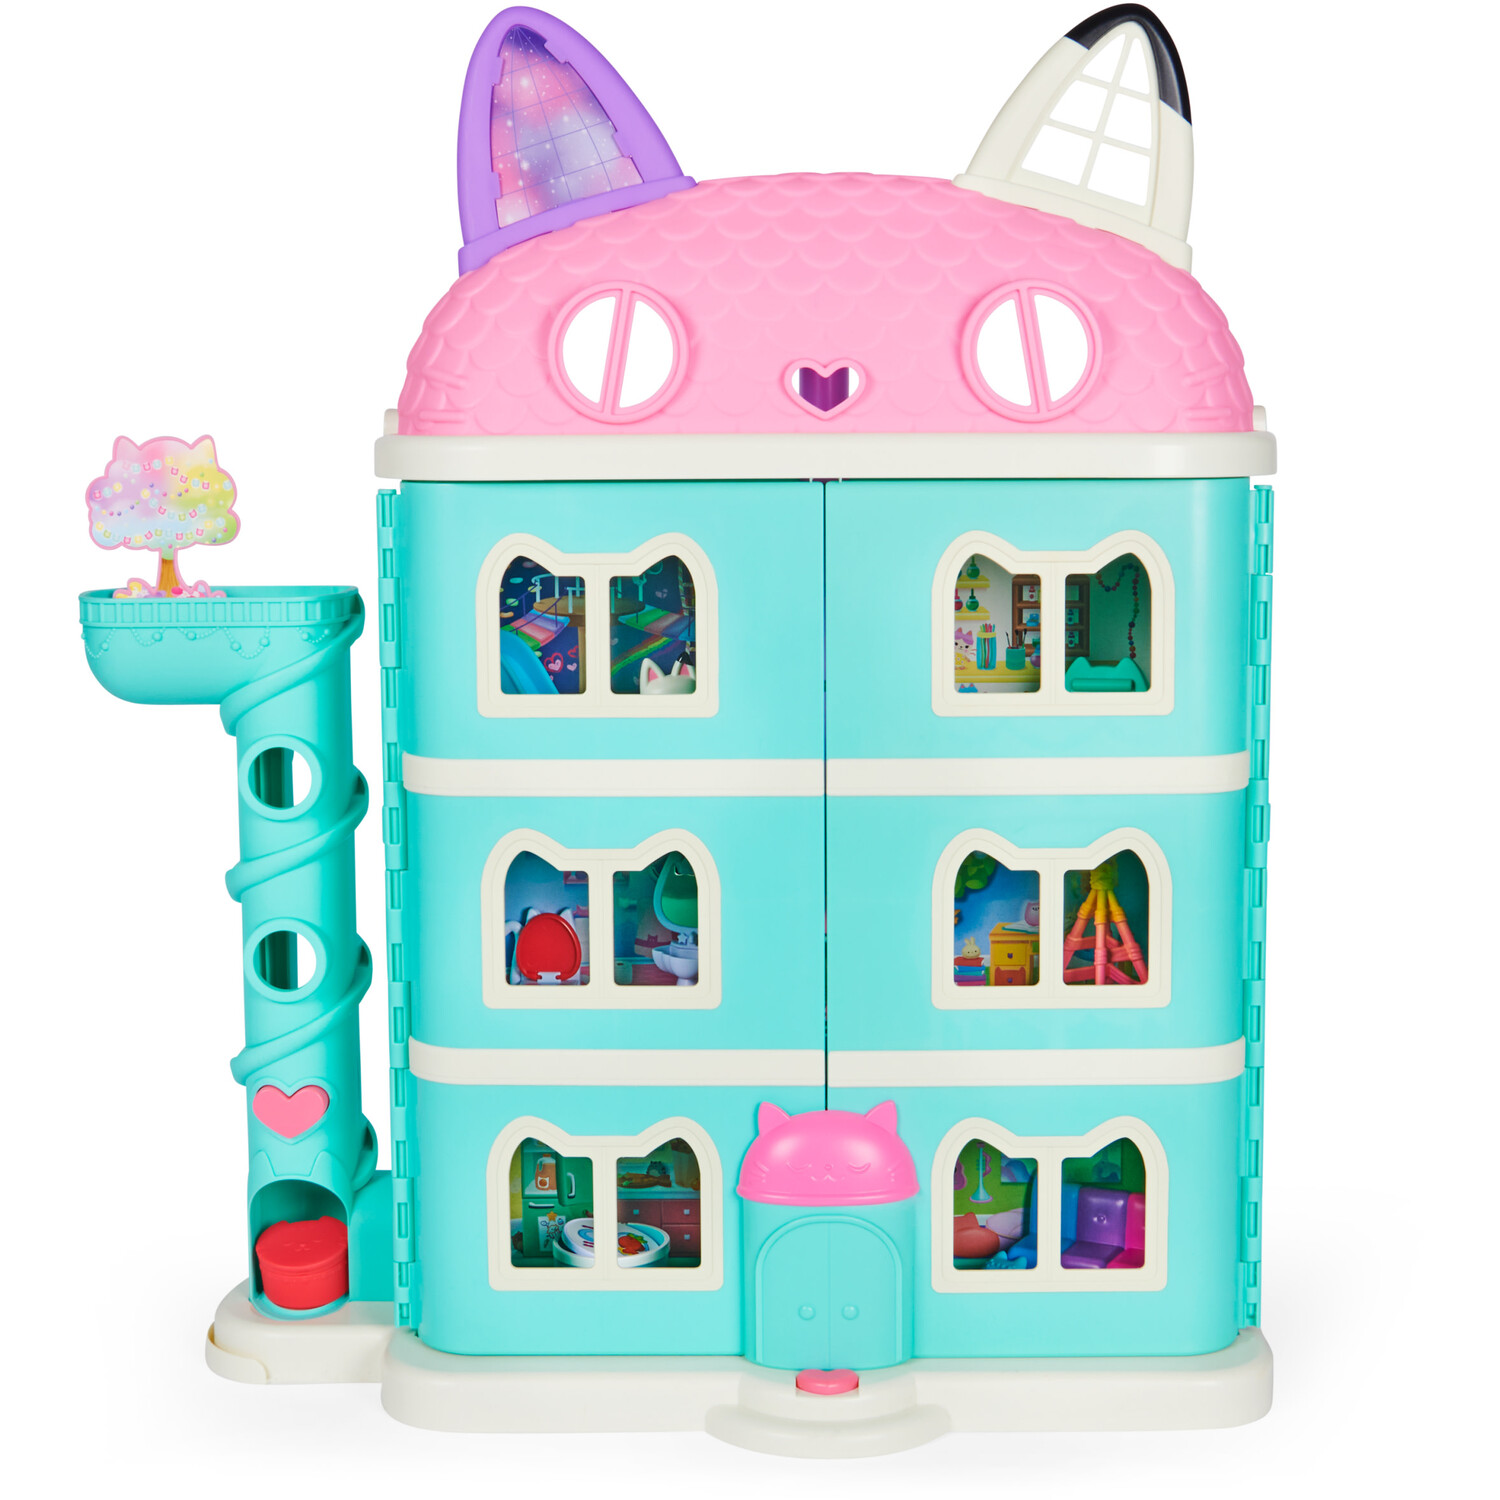 Gabby's Purrfect Dollhouse Playset Image 1